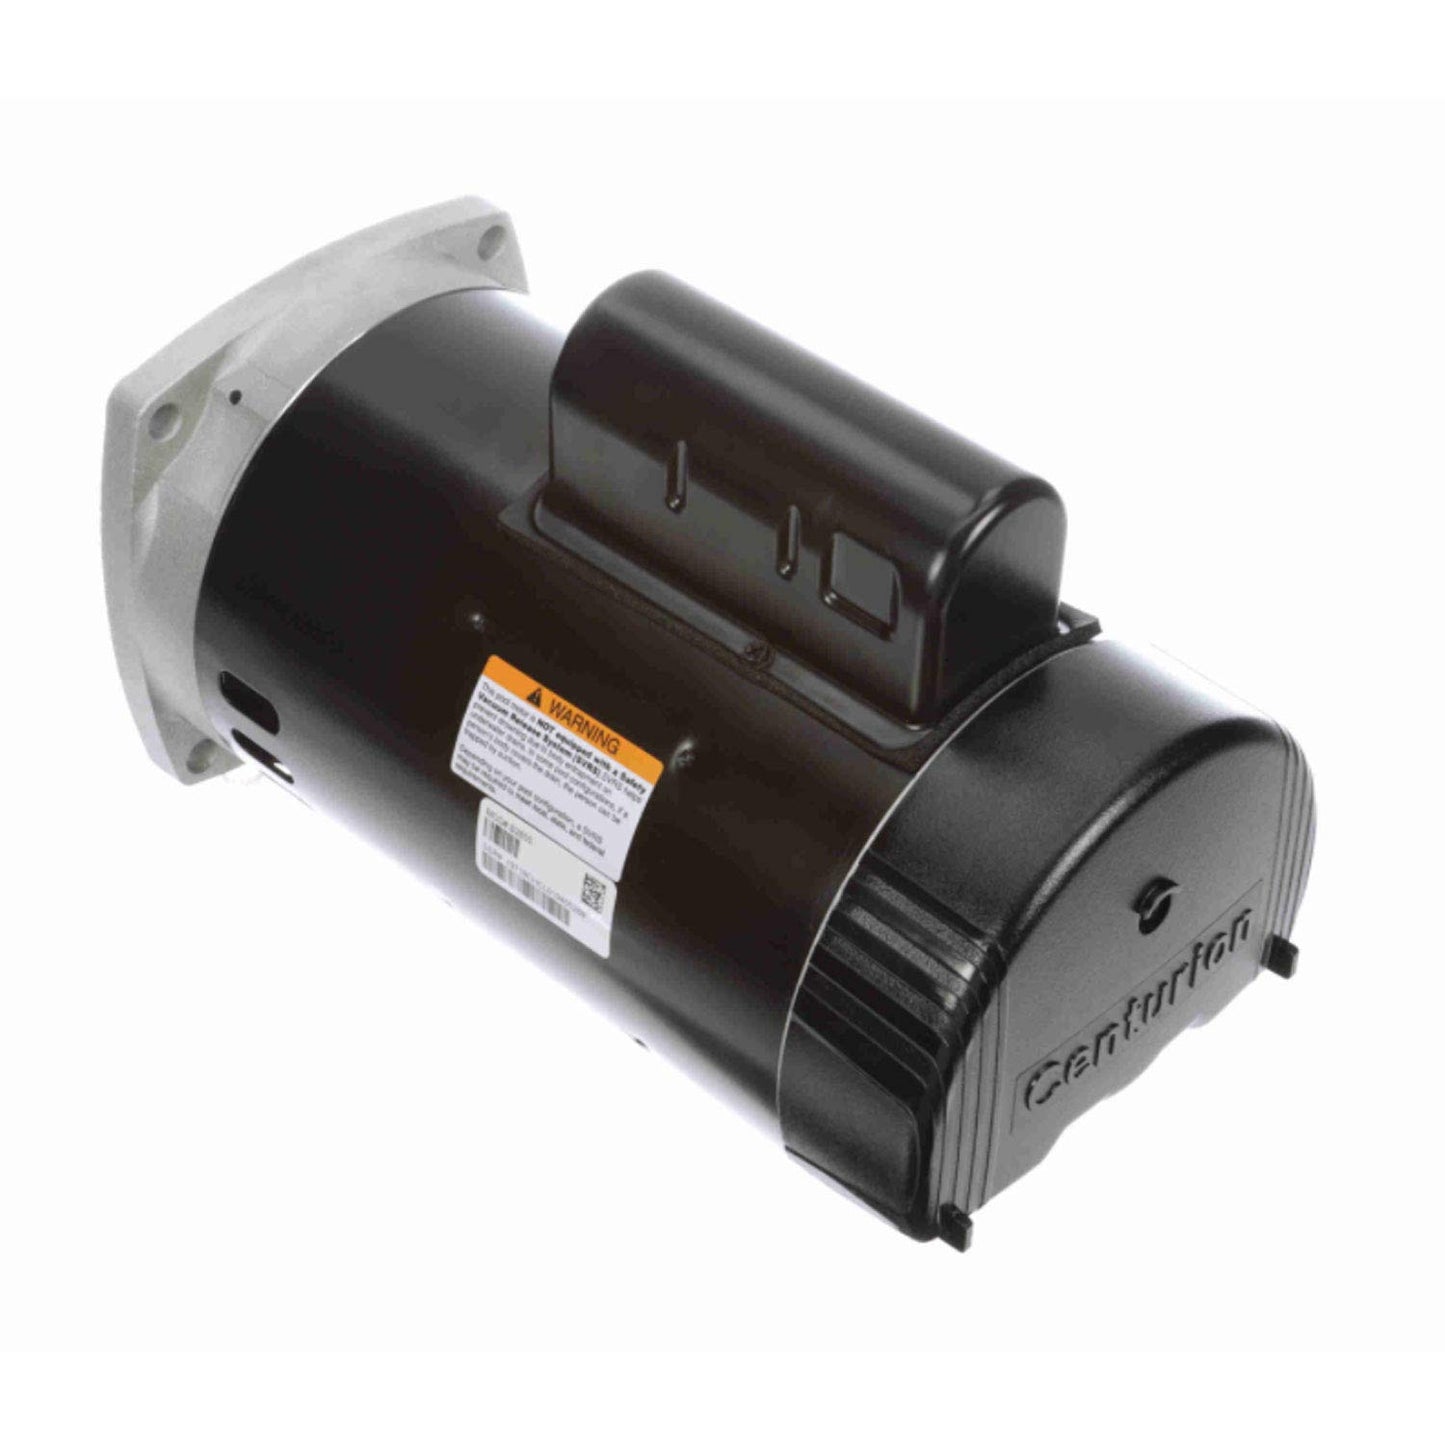 Regal Beloit B2855 Century 2 Horsepower 230V 3450 RPM Stainless Steel Continuous Single Phase Pool Pump Motor with Square Flange for Inground and Above Ground Pools 2.0